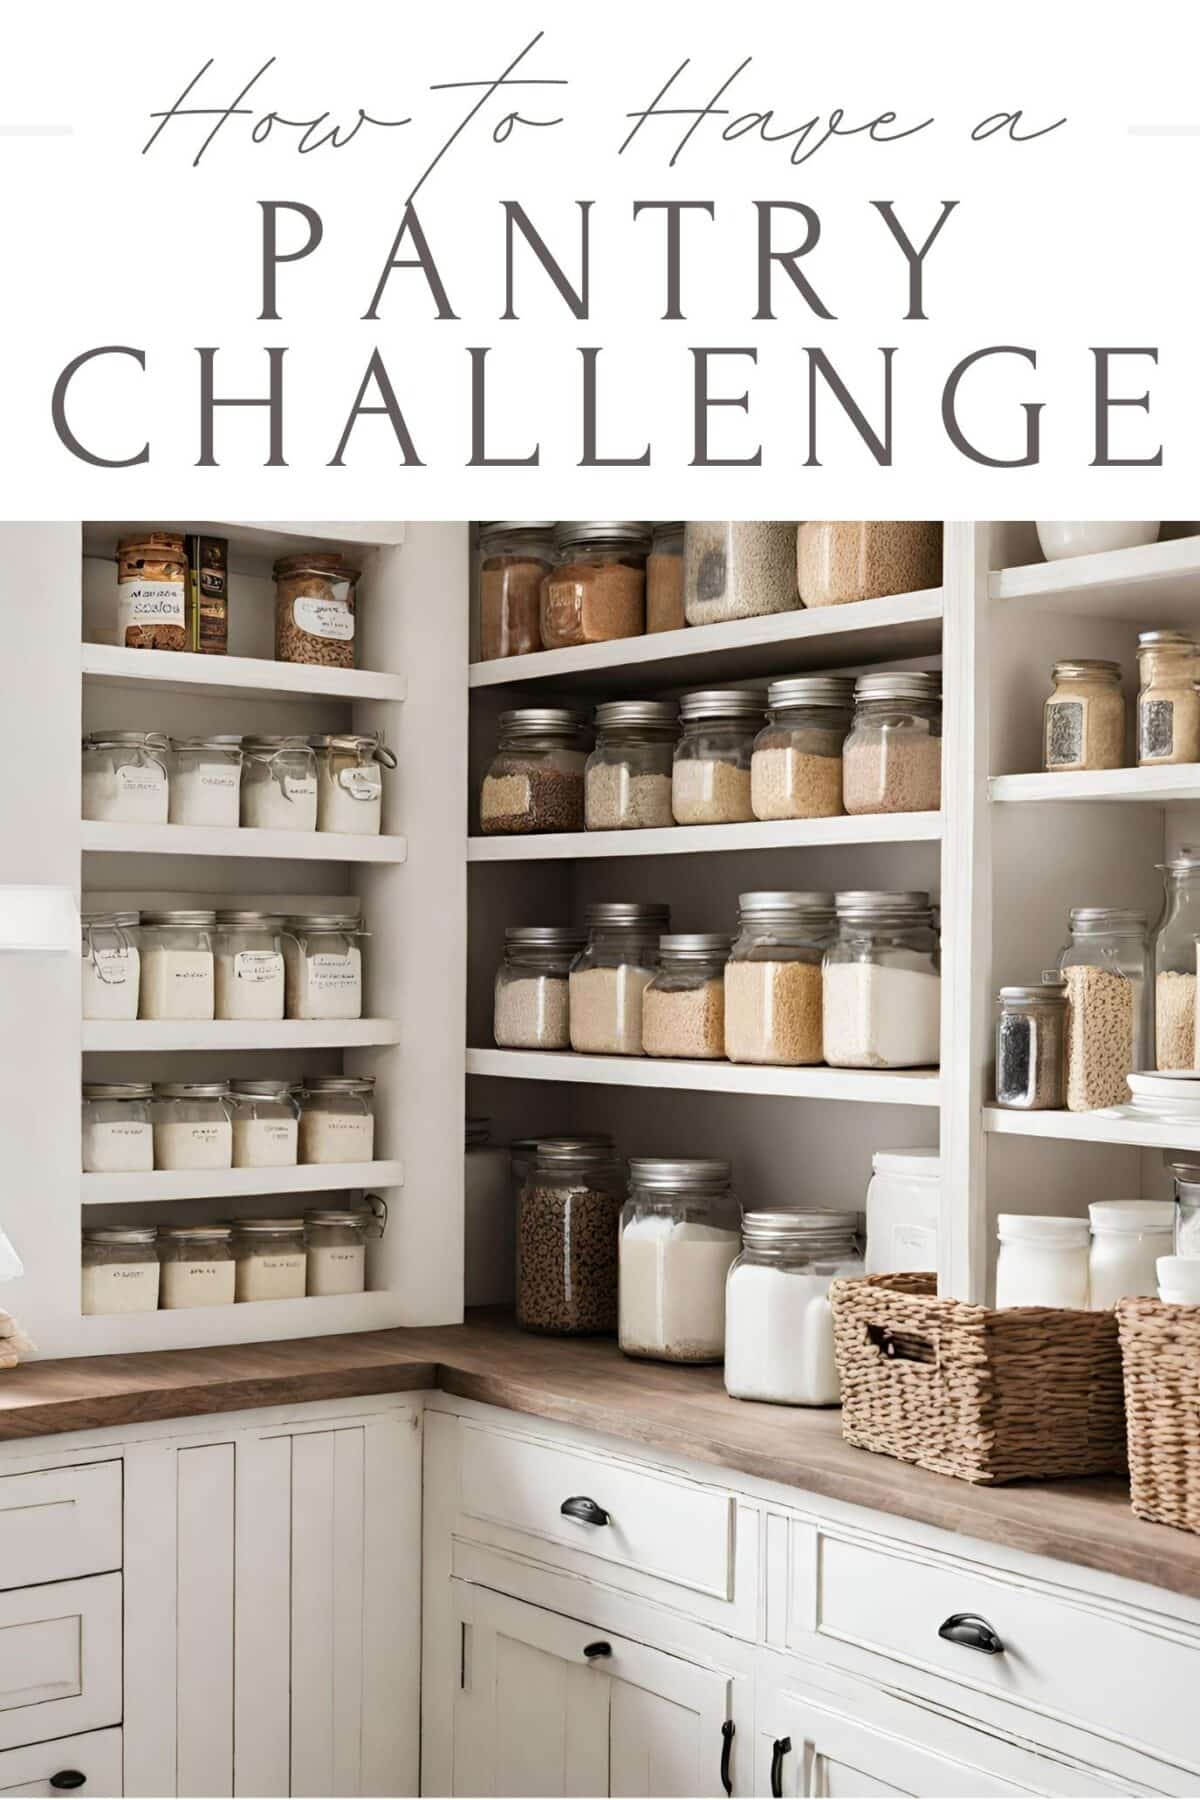 Want to eat up the leftovers in your pantry? Here are tips and ideas on how to create a sucessful pantry challenge!